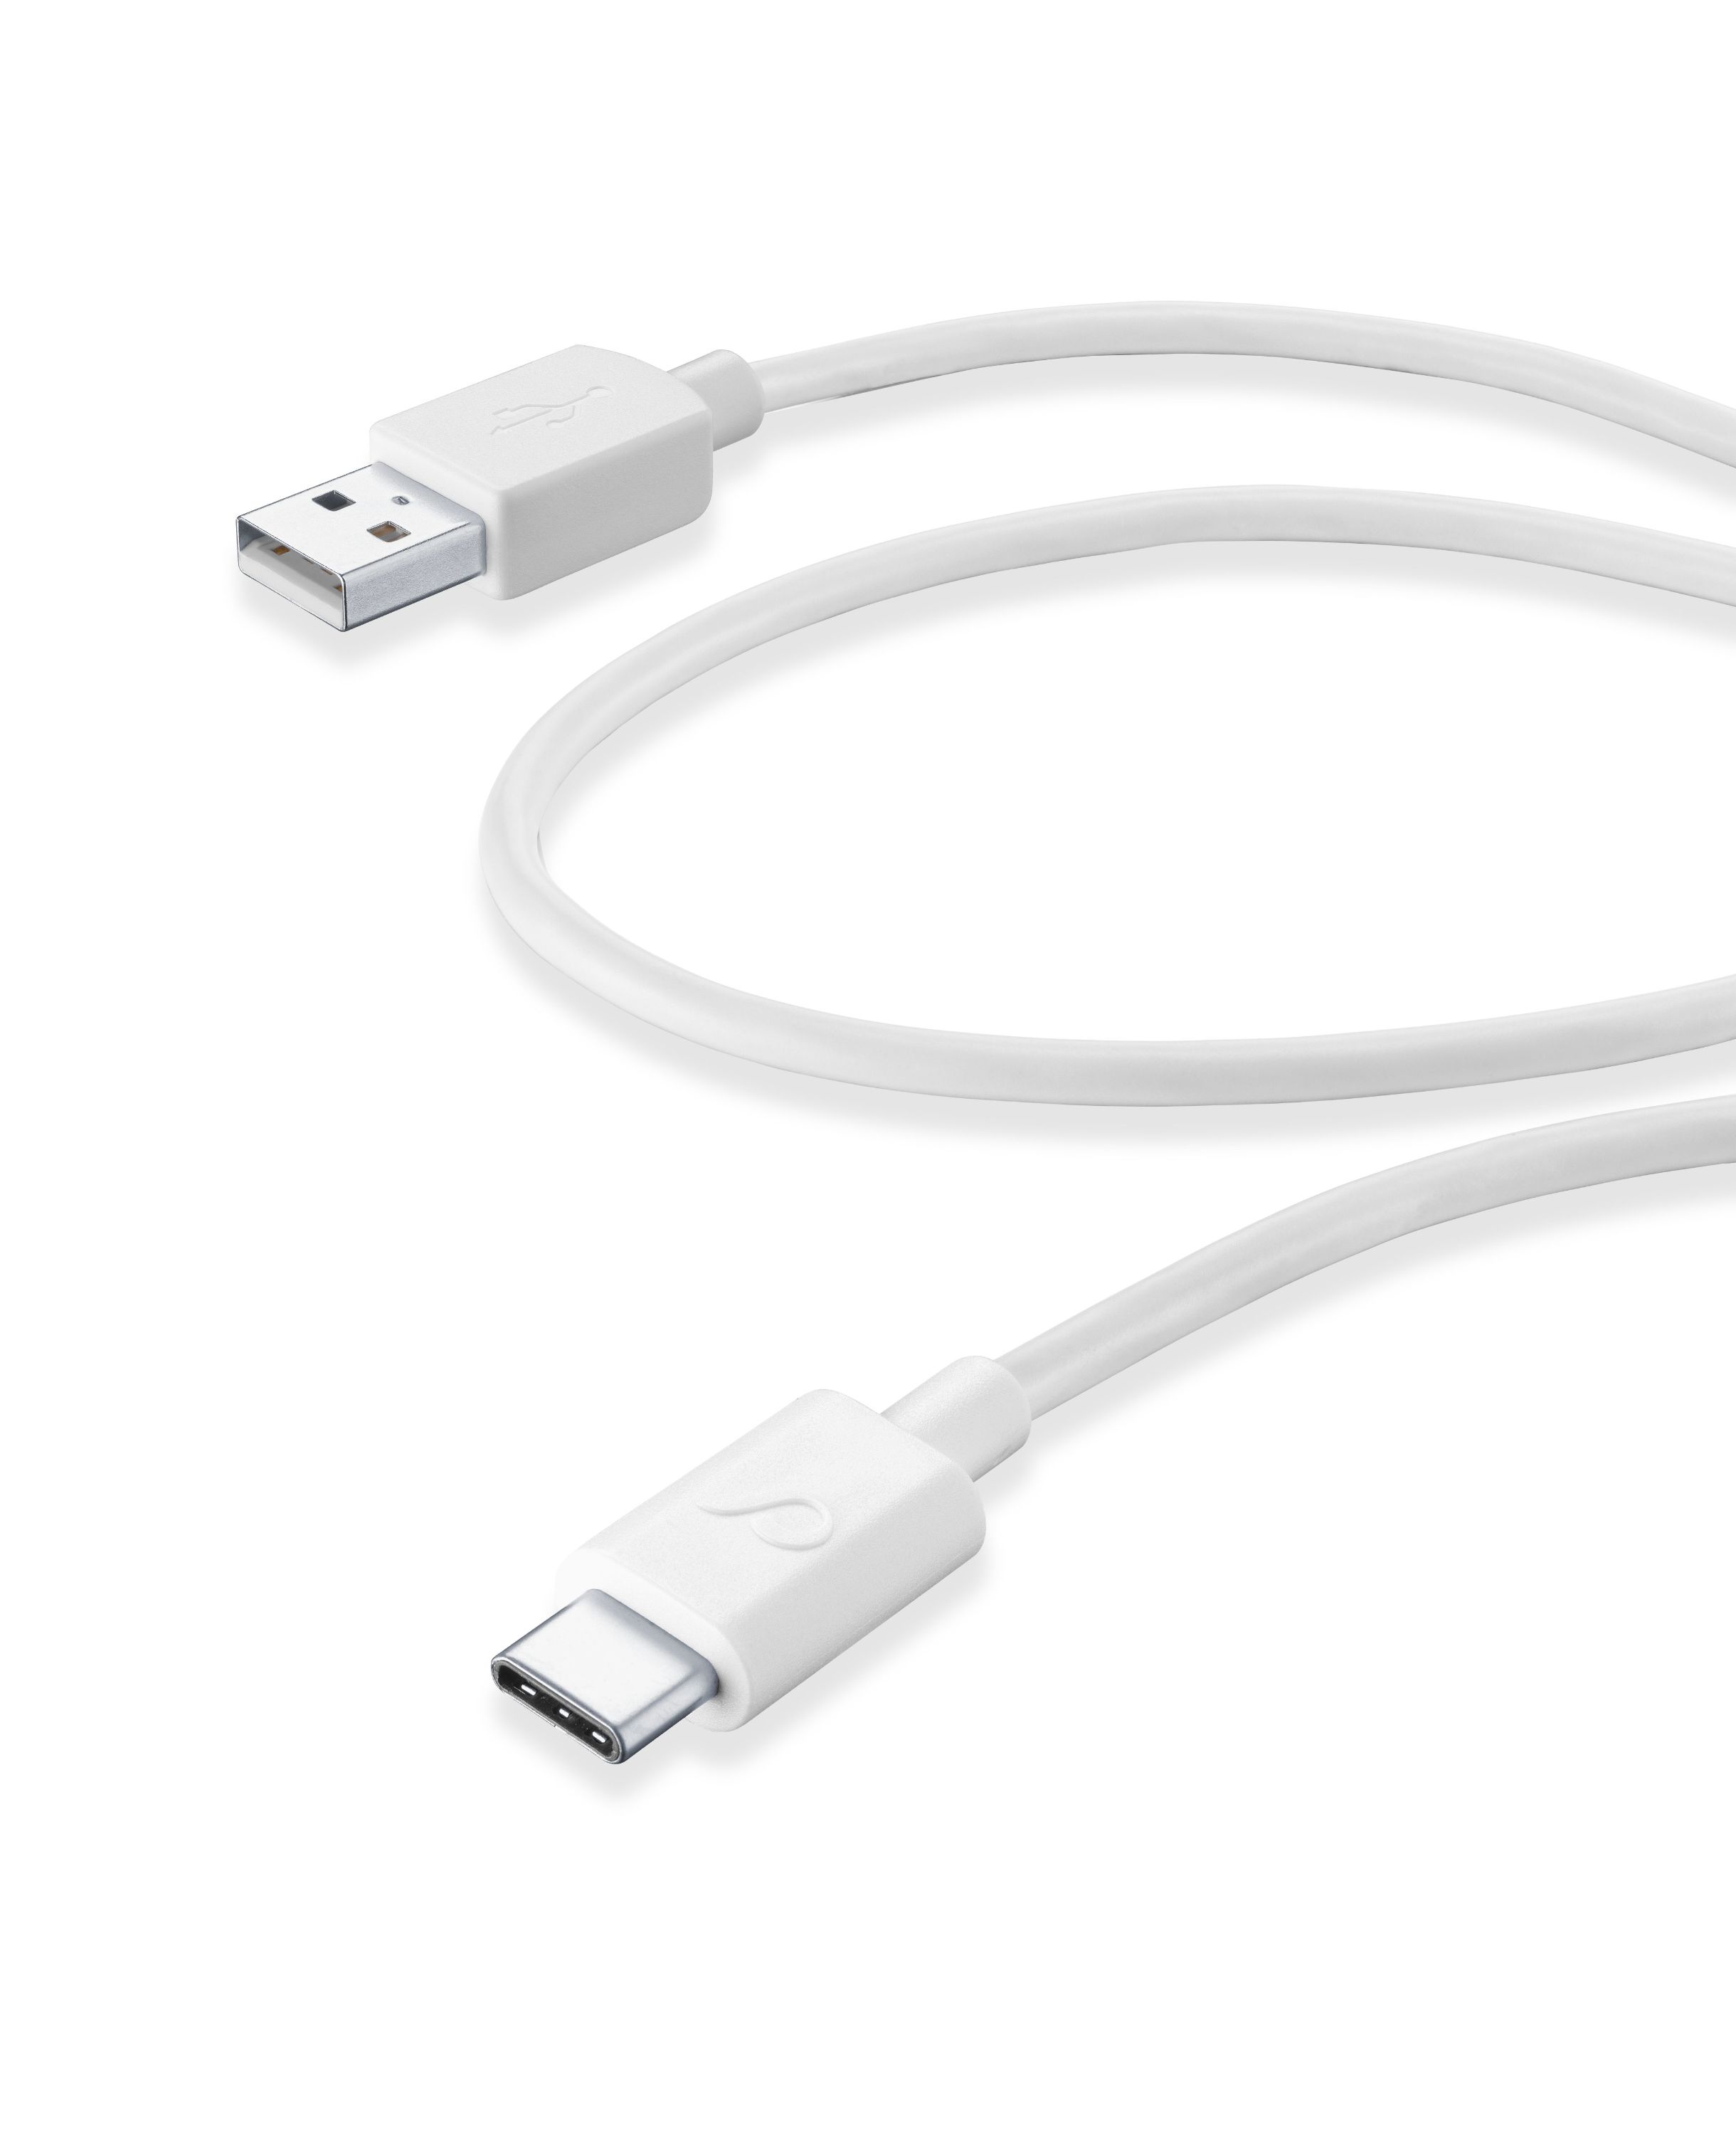 Usb cable, usb-a to usb-c 60cm, white